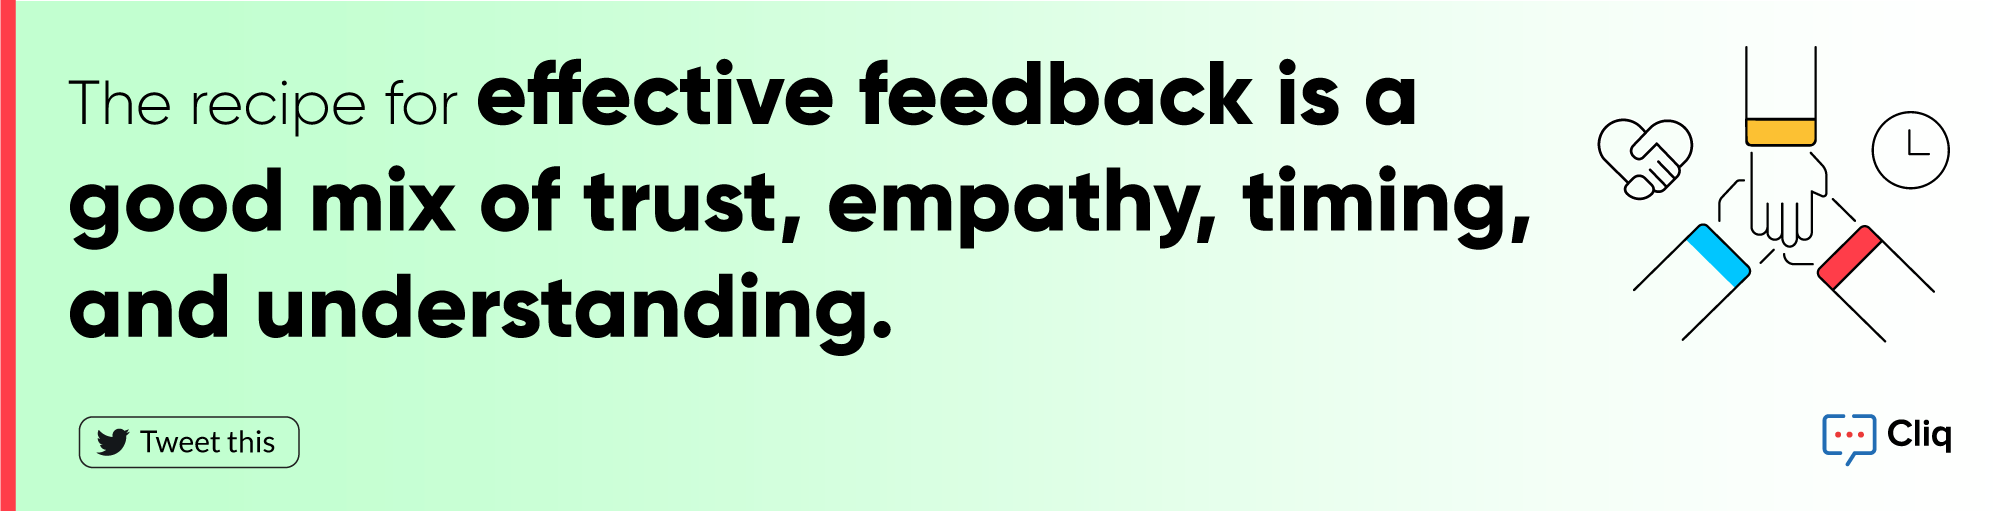 The recipe for effective feedback is a good mix of trust, empathy, timing, and understanding. - Zoho Cliq